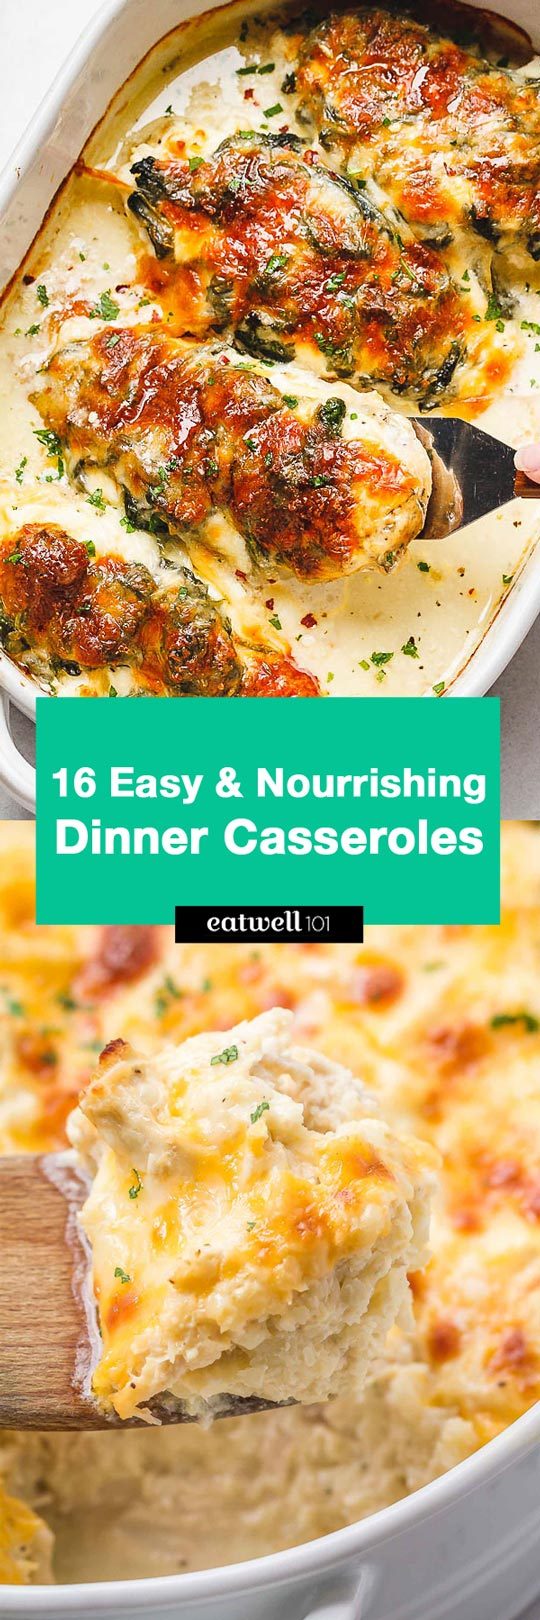 16 Easy Casserole Recipes for Dinner - Easy and nourishing - Perfect for when you are super busy and need something to make in a pinch.